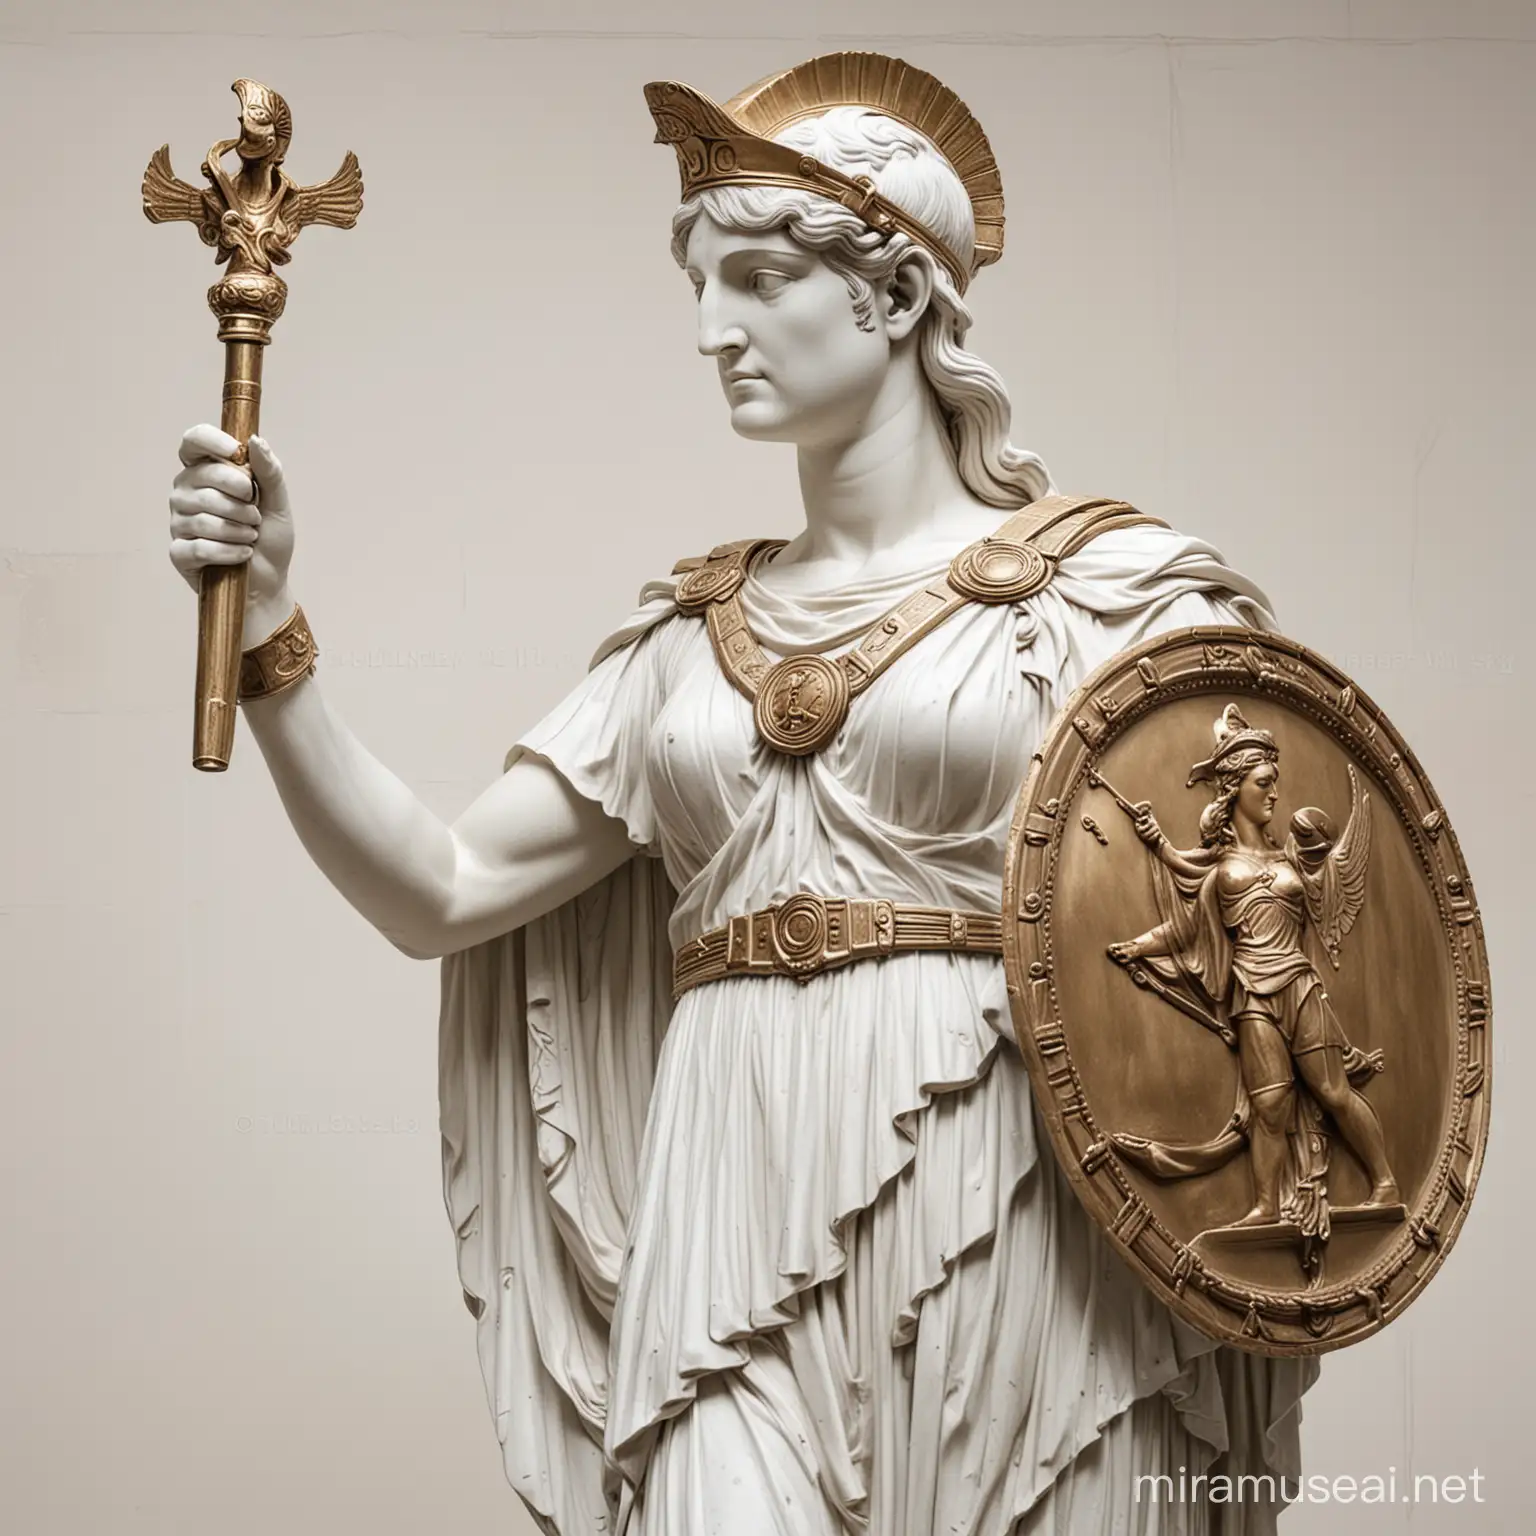 Athena Statue with Shield on White Background